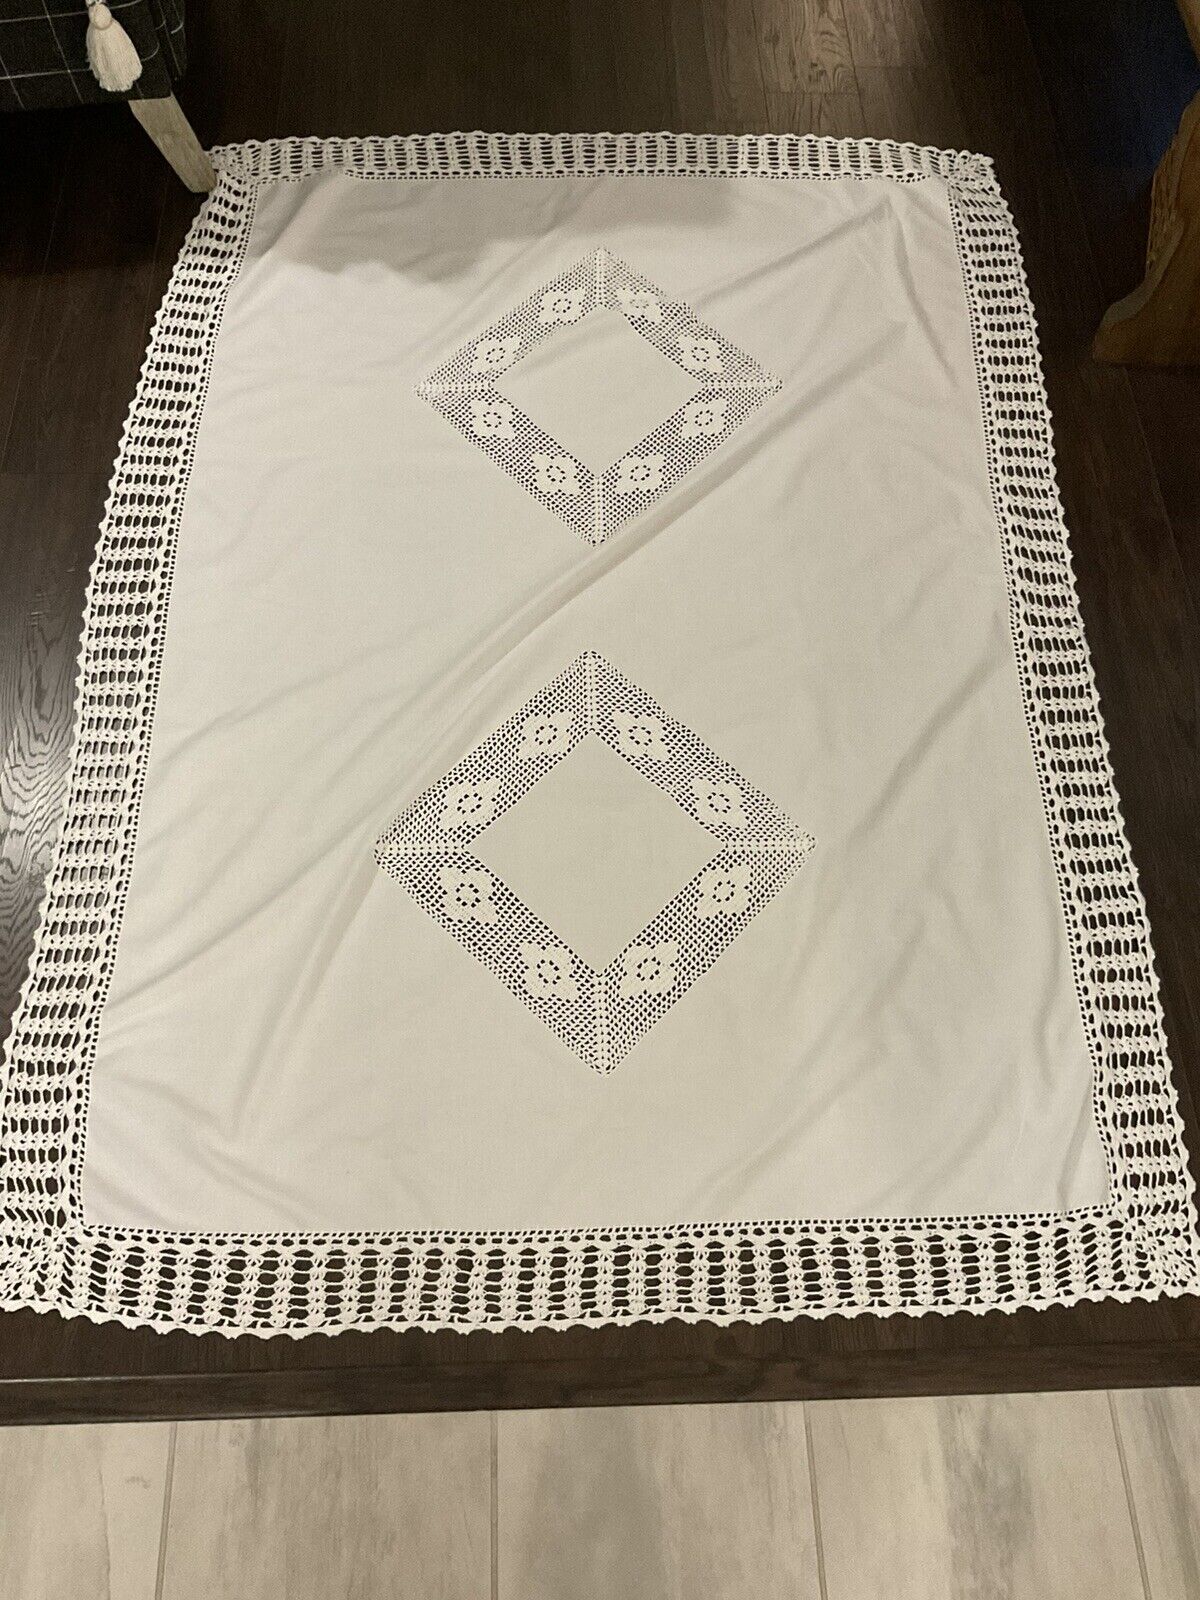 Vintage Table Cloth White/ W  Hand Embroidery And Crocheting Around Edges/center